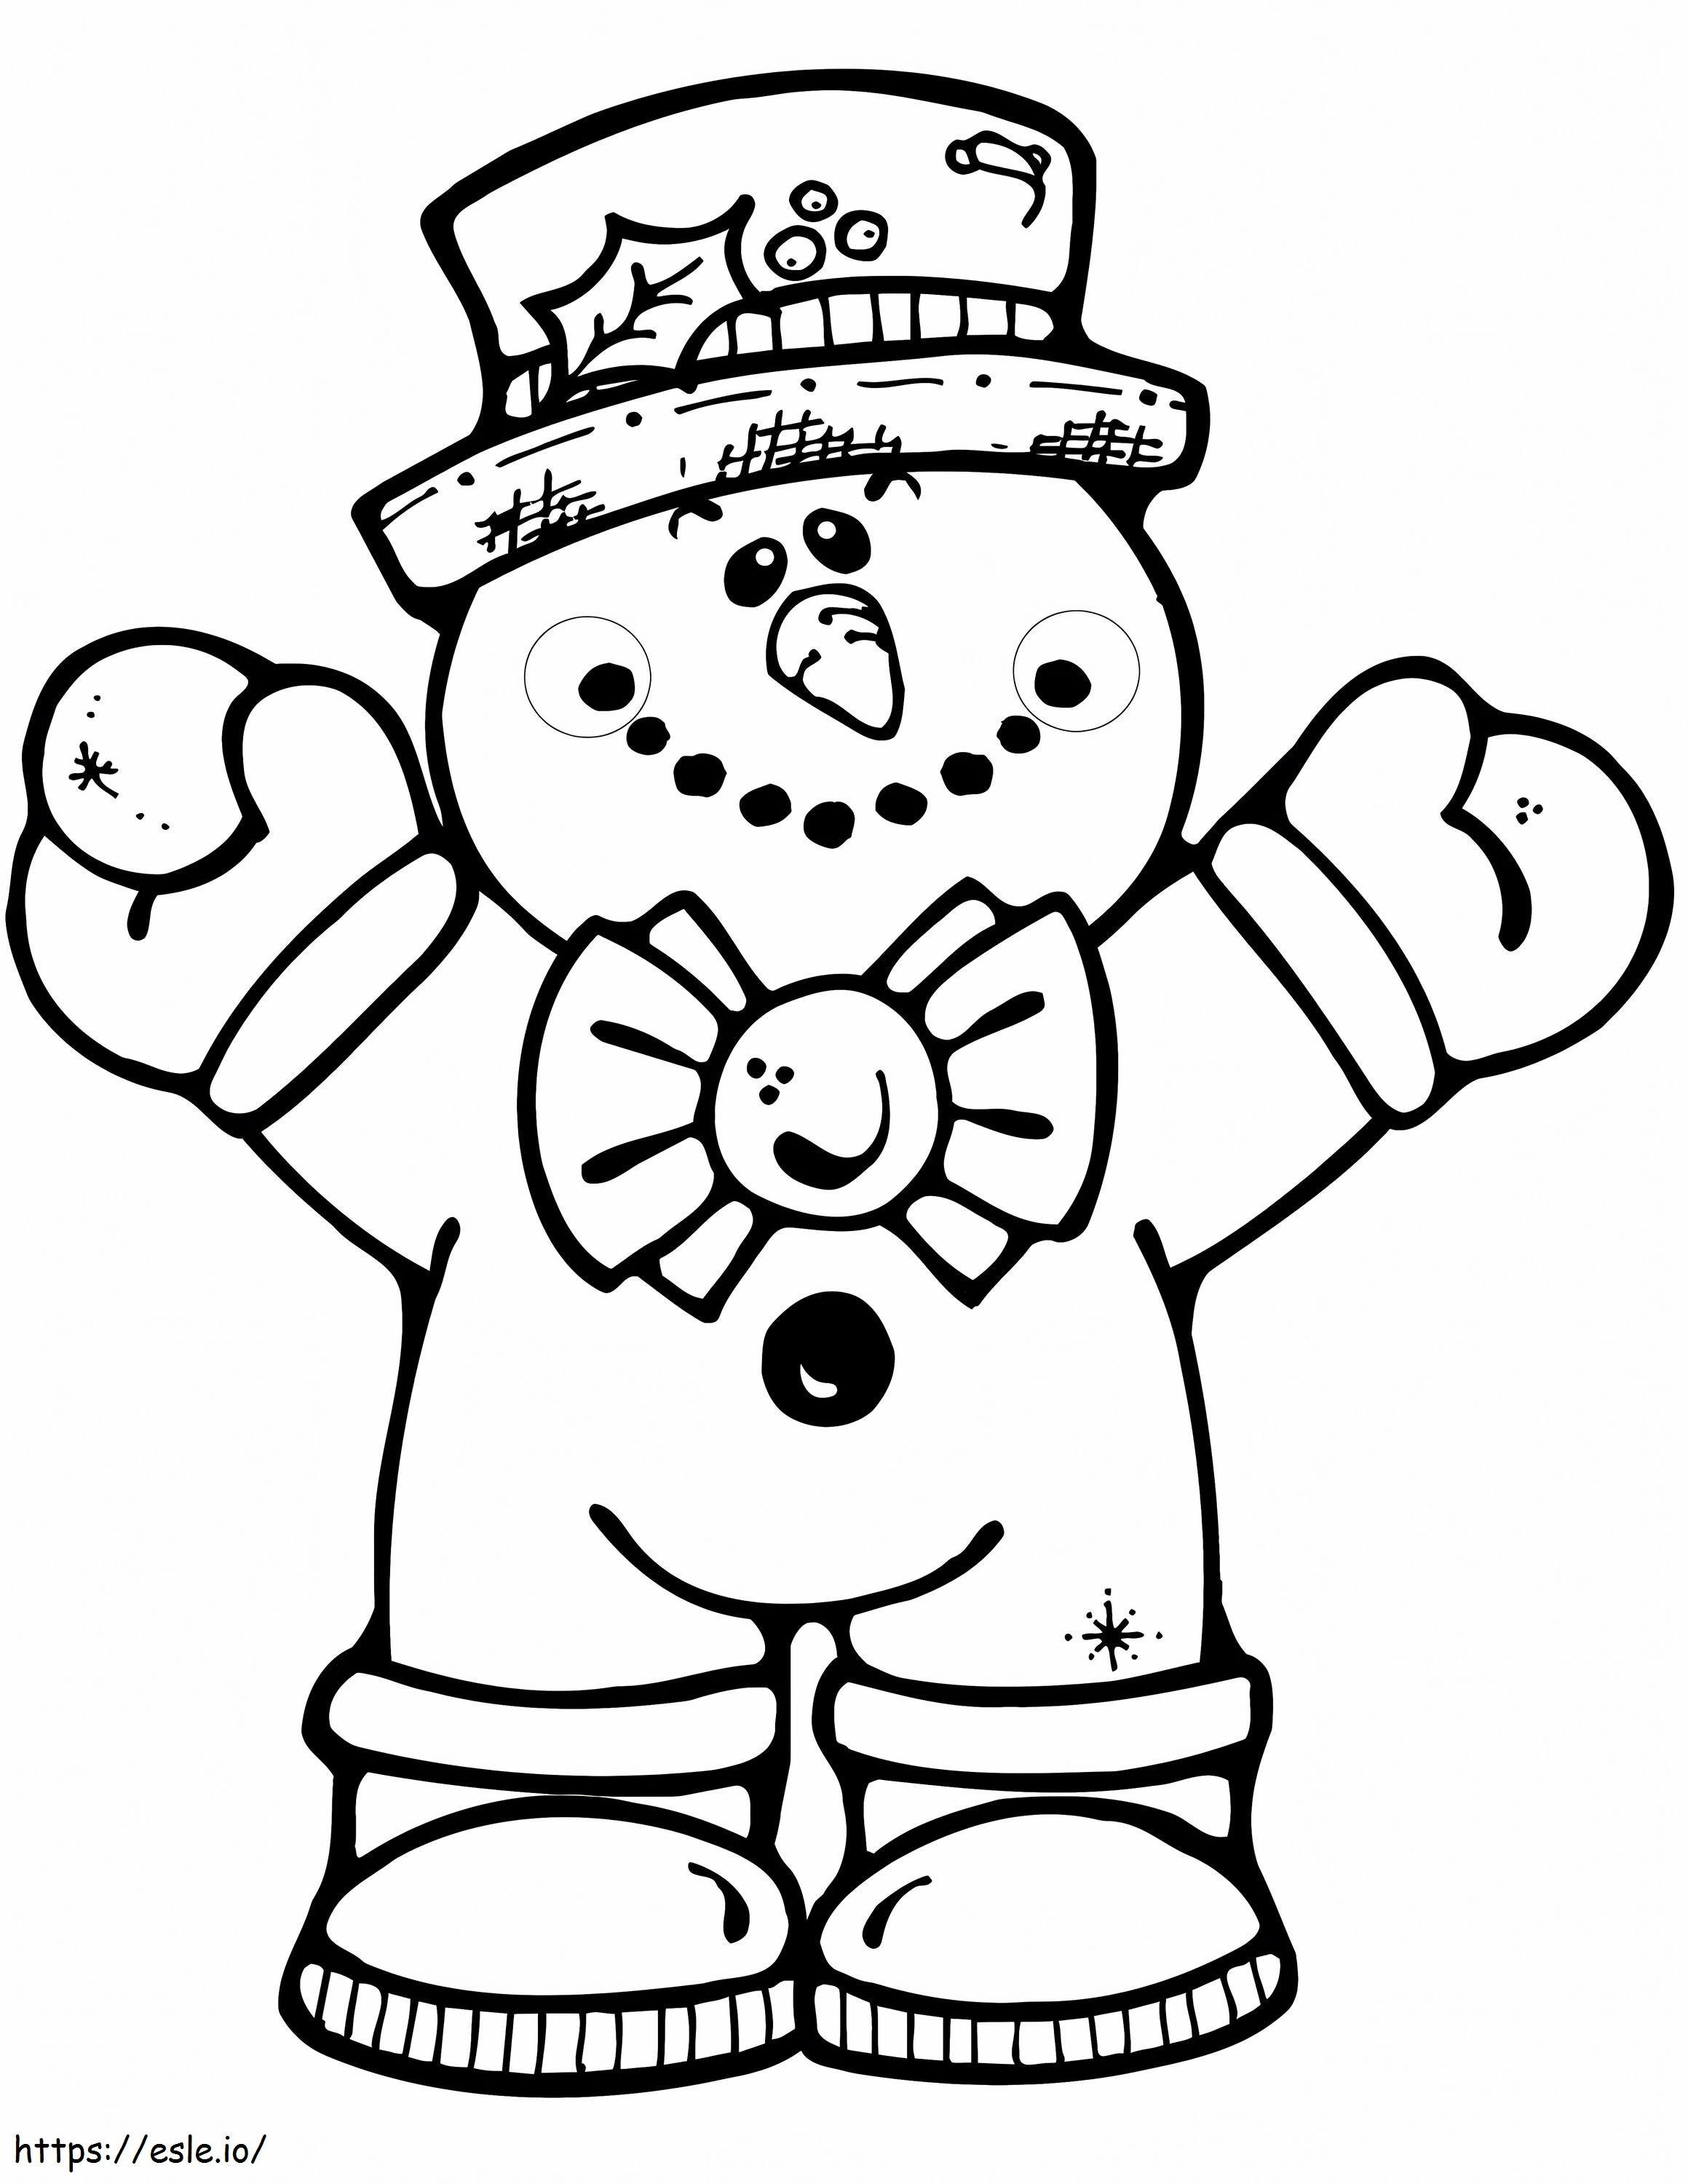 Hugging Snowman coloring page